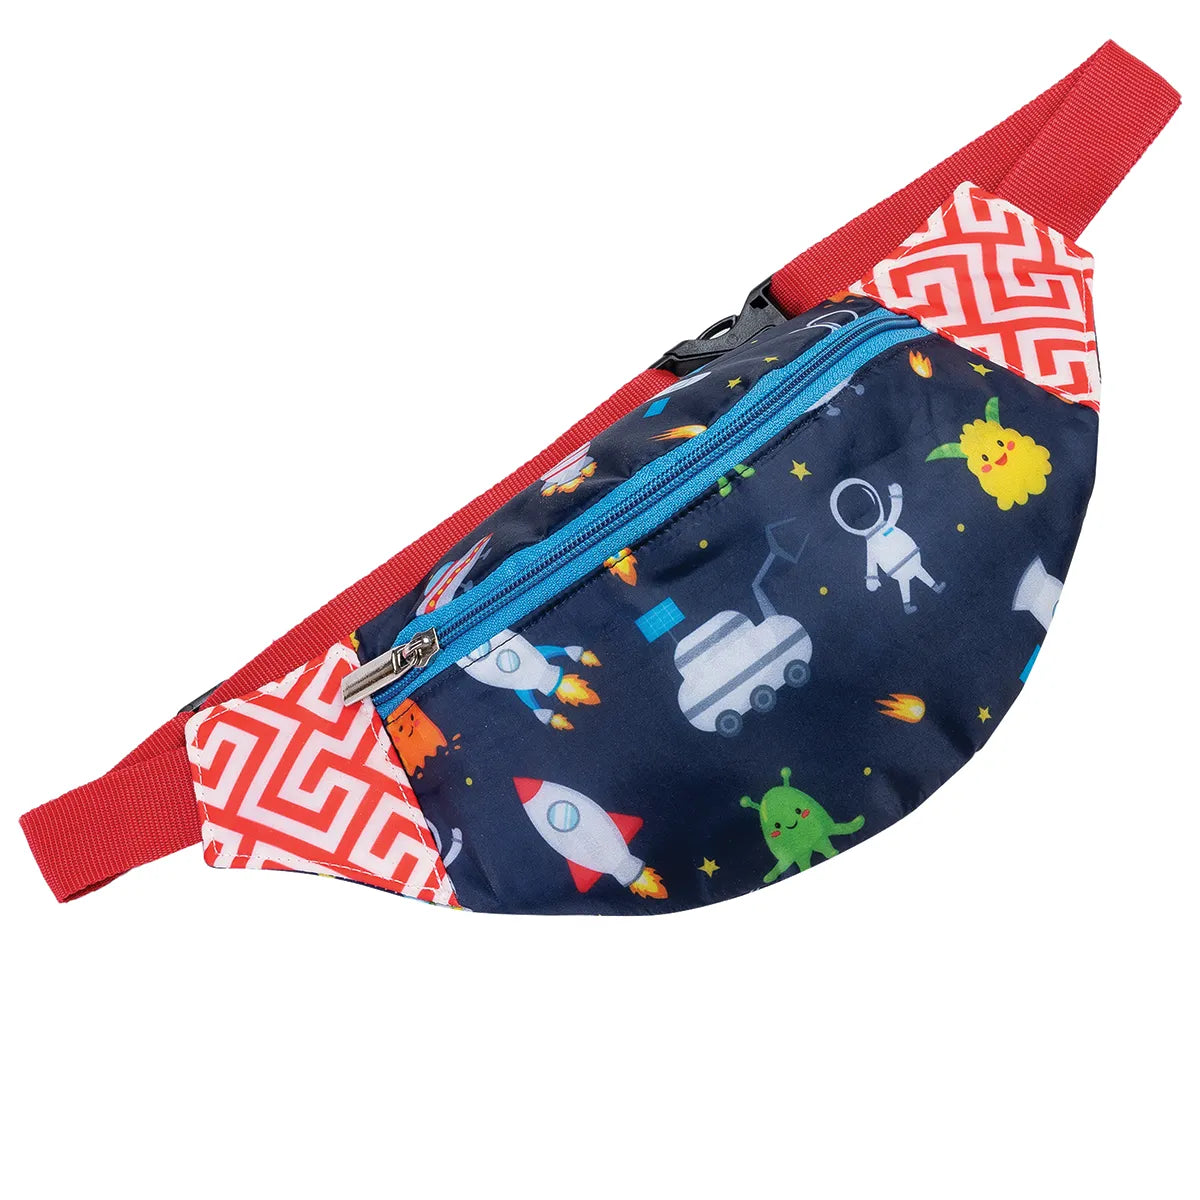 Space Fanny Pack - Site View